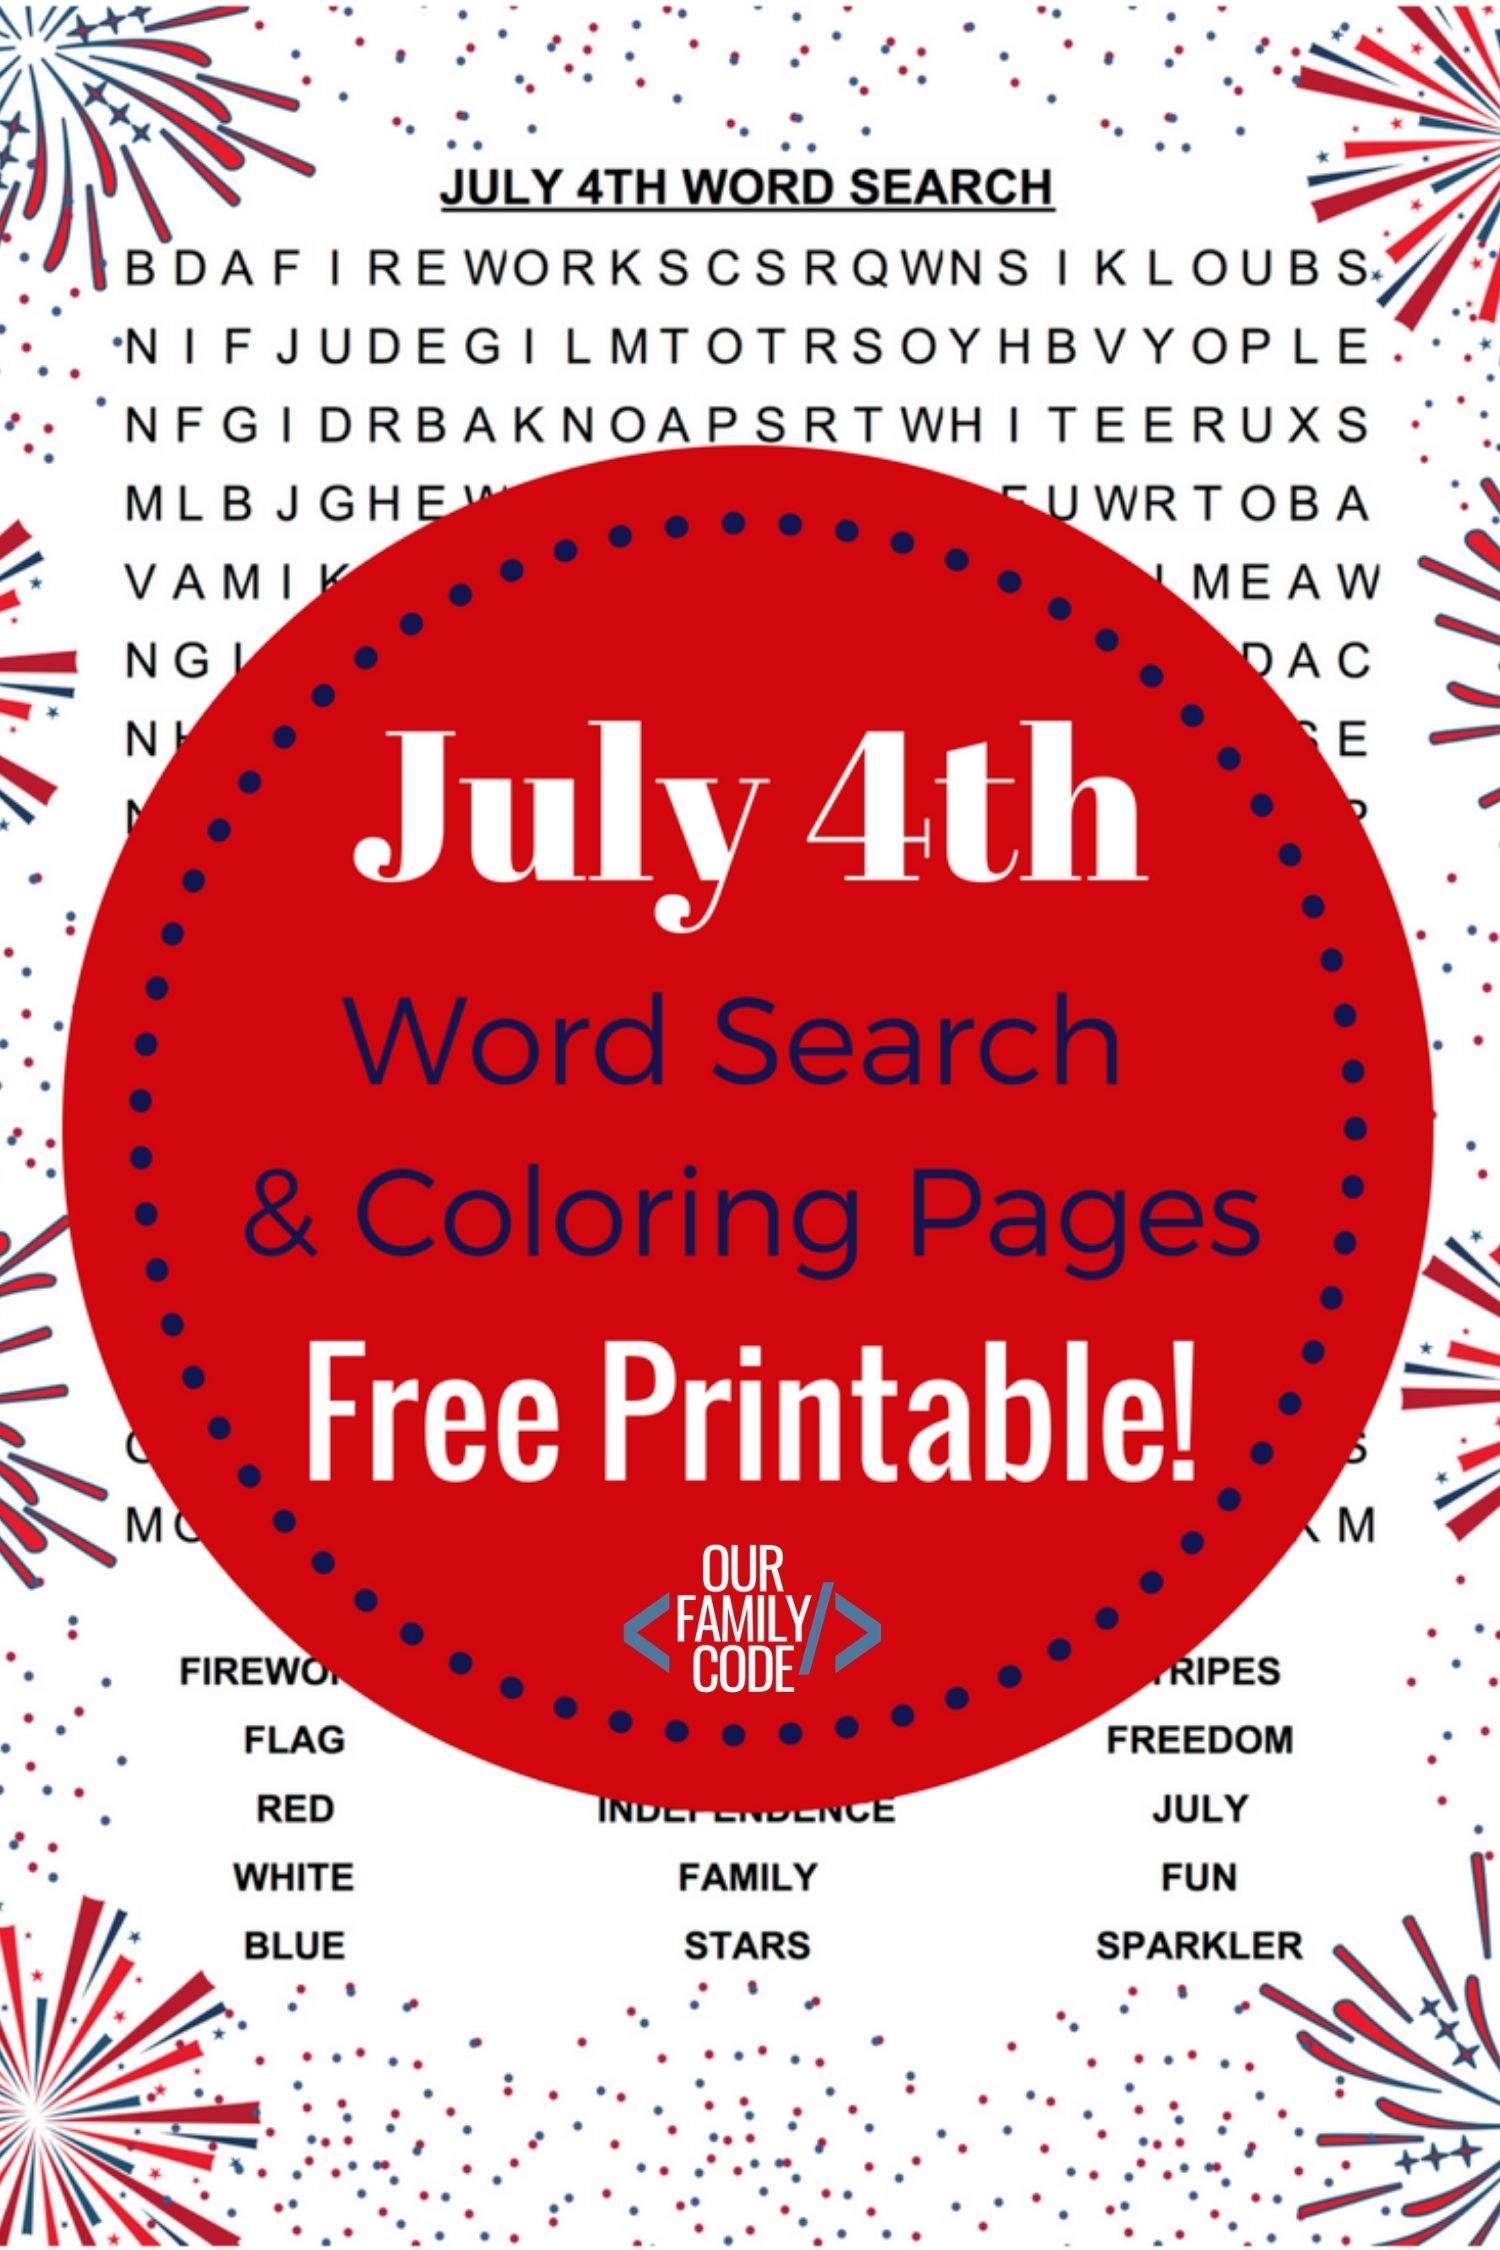 A picture of a July 4th word search with red circle with text that reads "July 4th word search and coloring pages free printable".